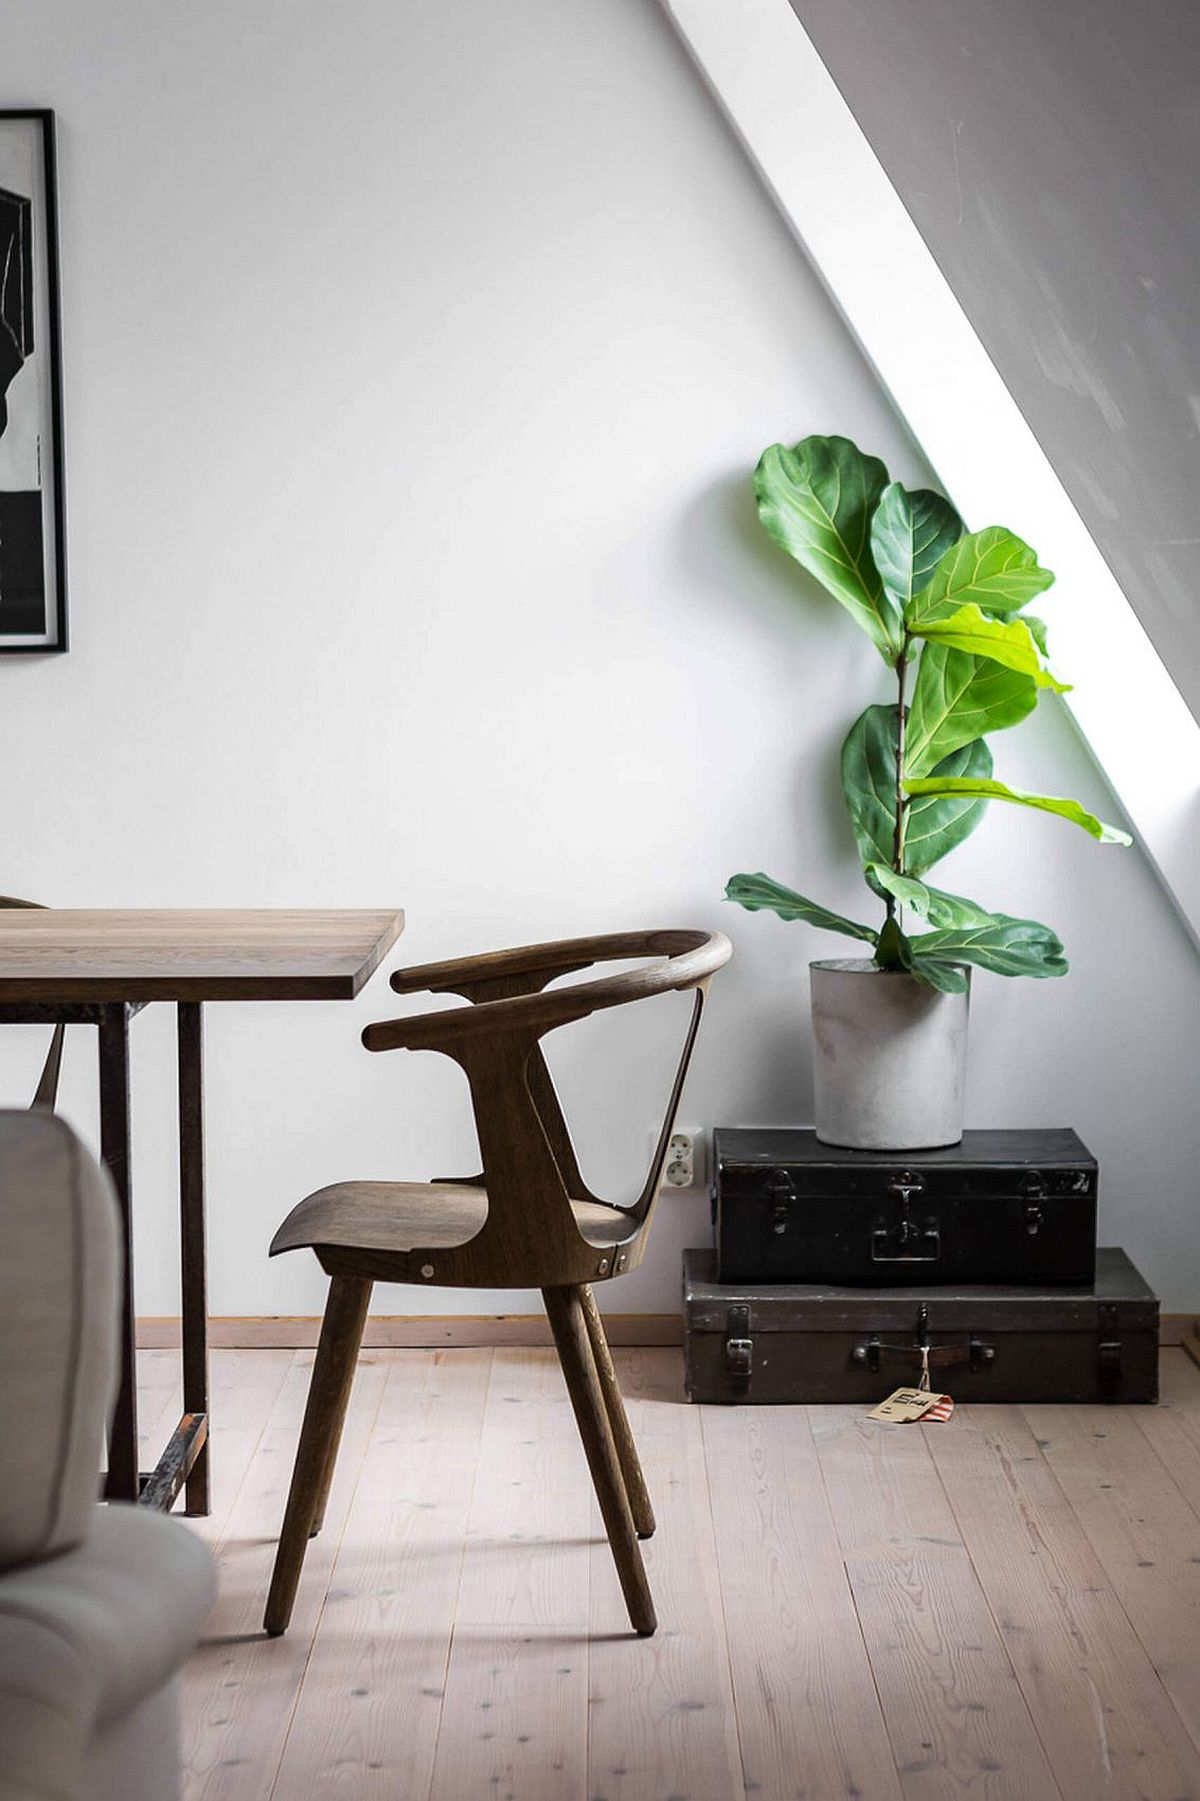 Trunks-in-the-corner-with-a-plant-make-a-fun-addition-to-the-dining-space